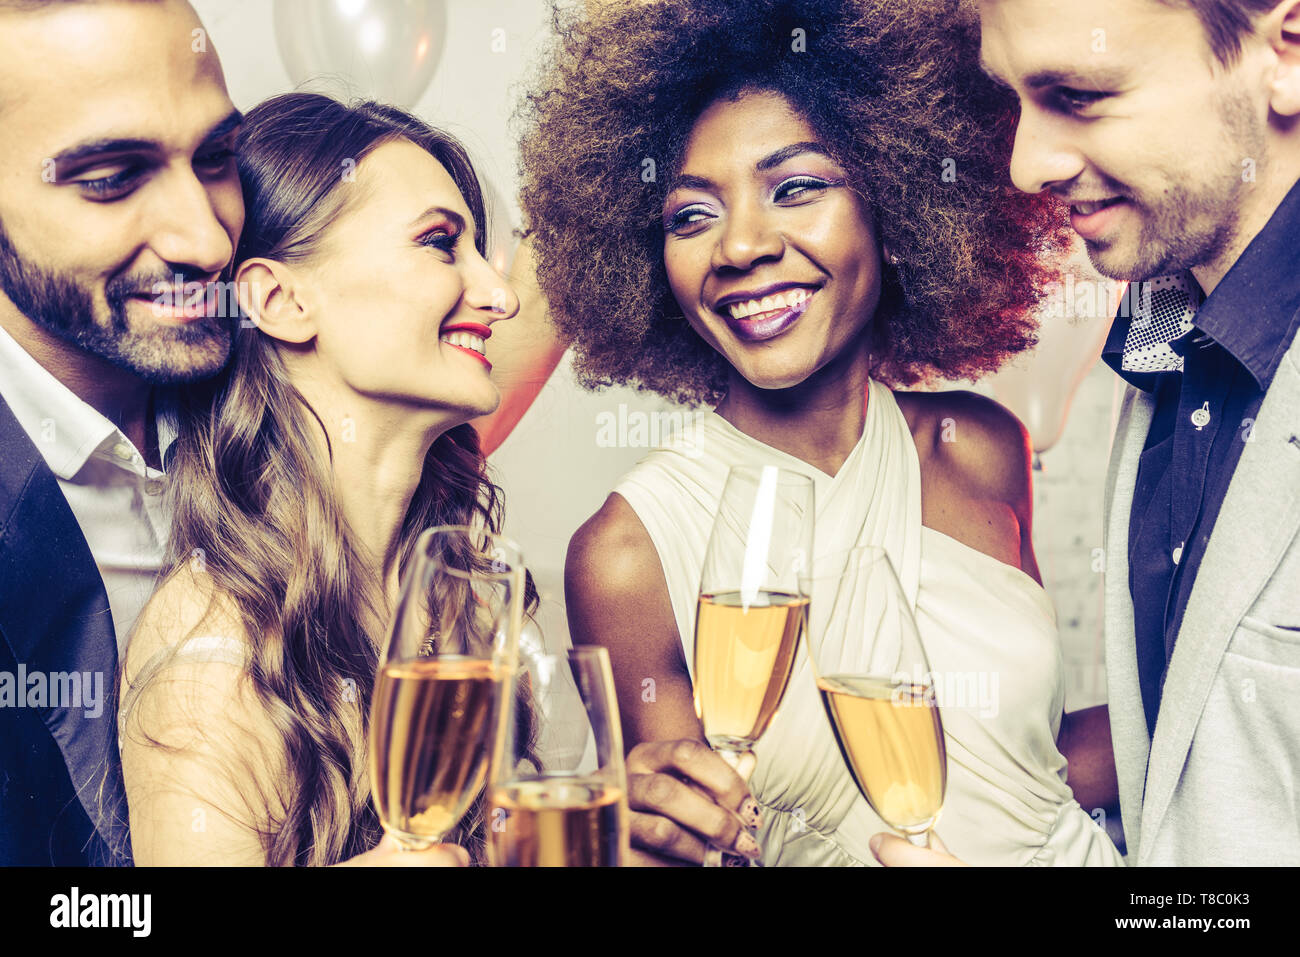 Men and women celebrating while clinking glasses with sparkling wine Stock Photo